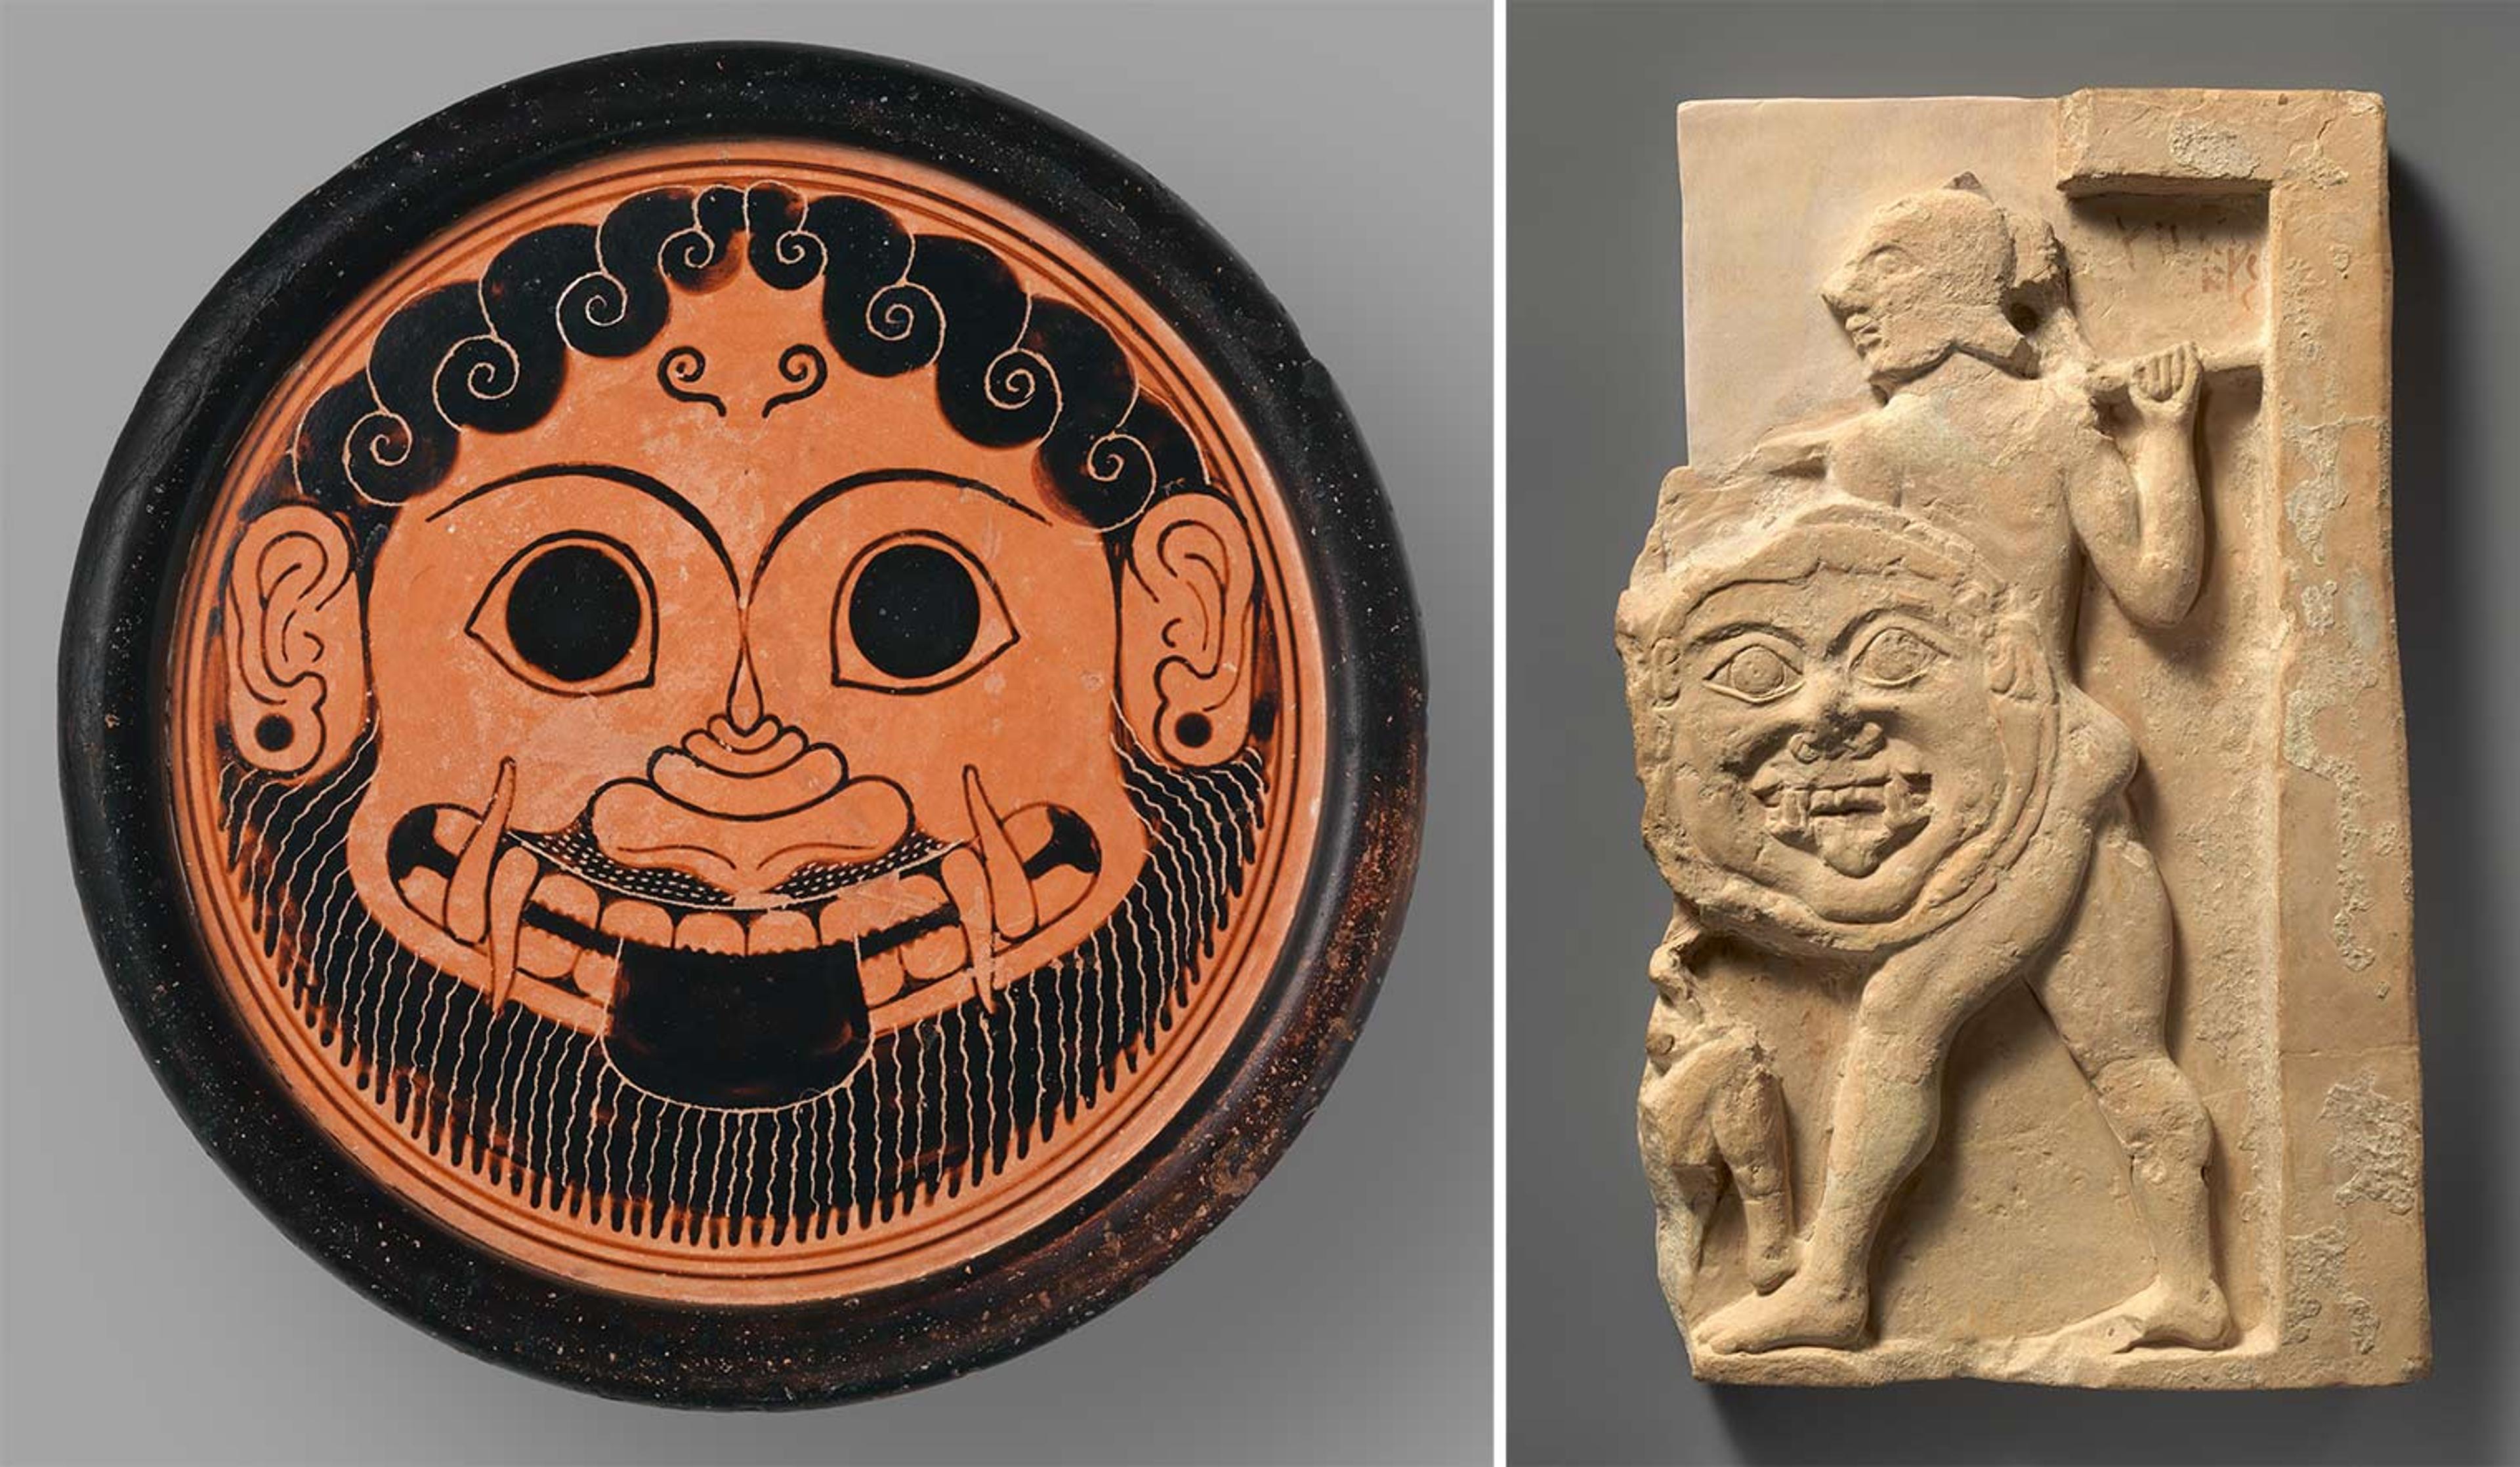 A Gorgon head and a frieze with Achilles carrying a shield with a big Gorgon head on it